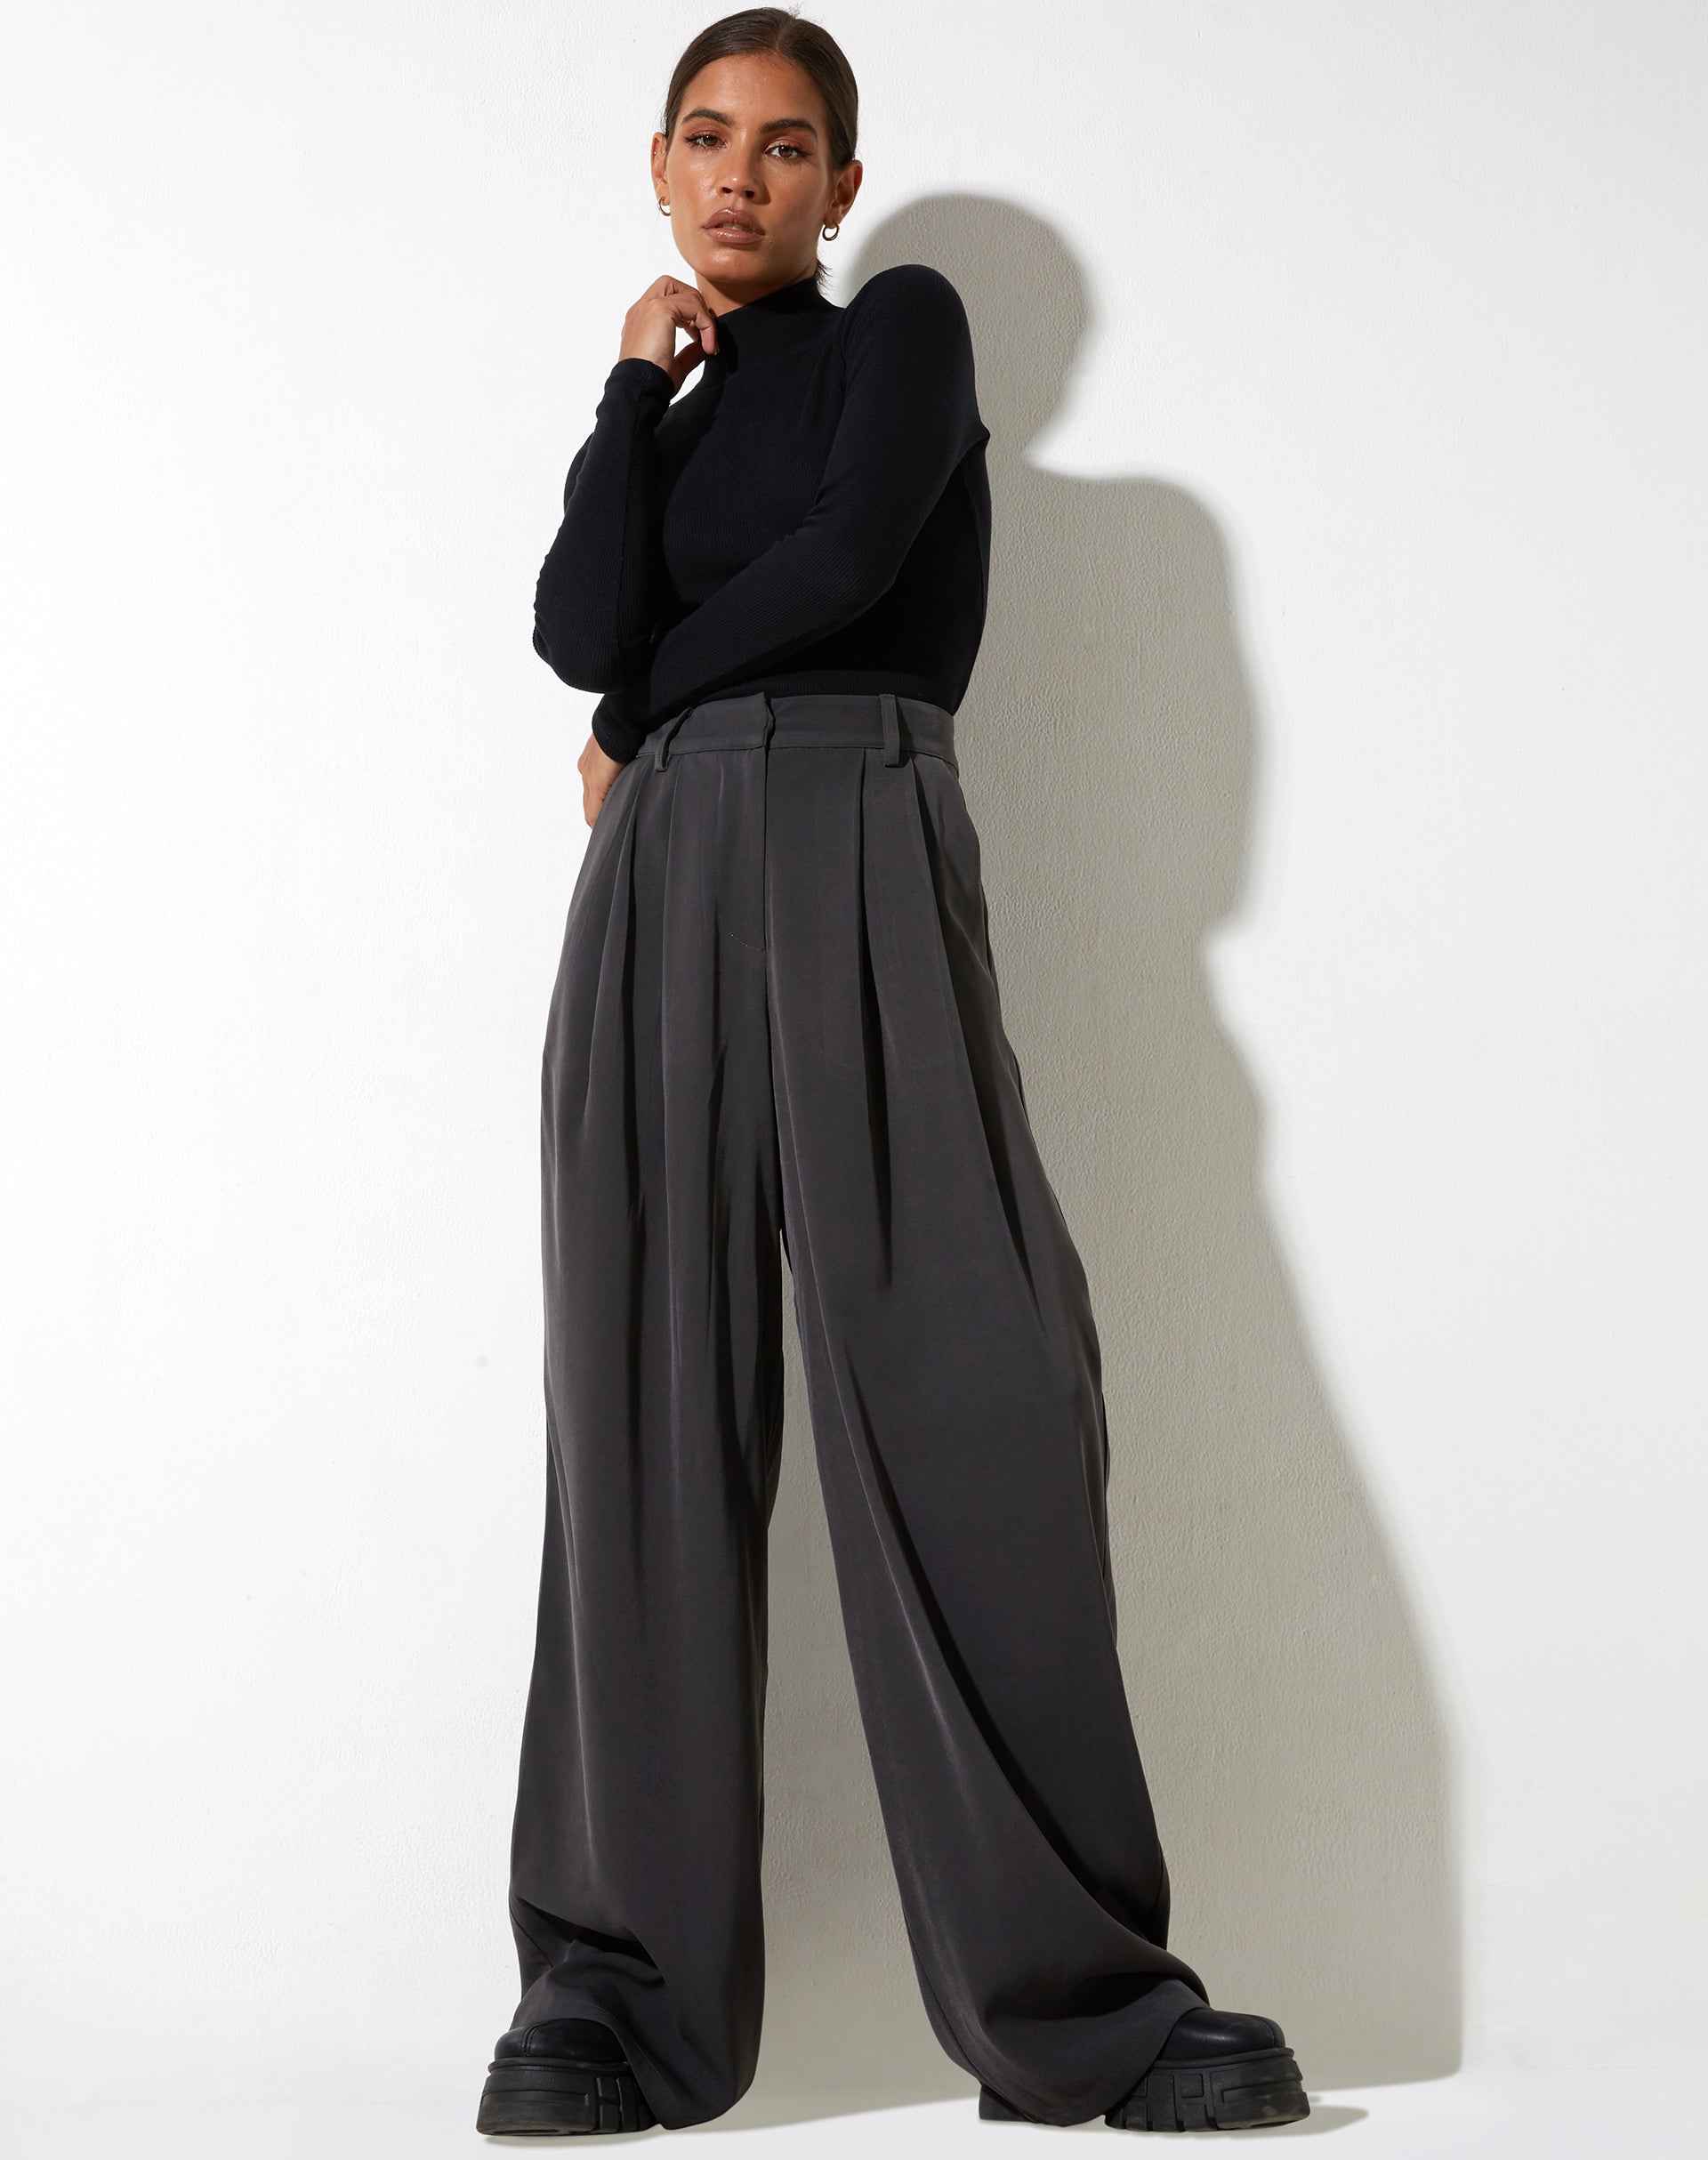 Yeka Trouser in Tailoring Charcoal